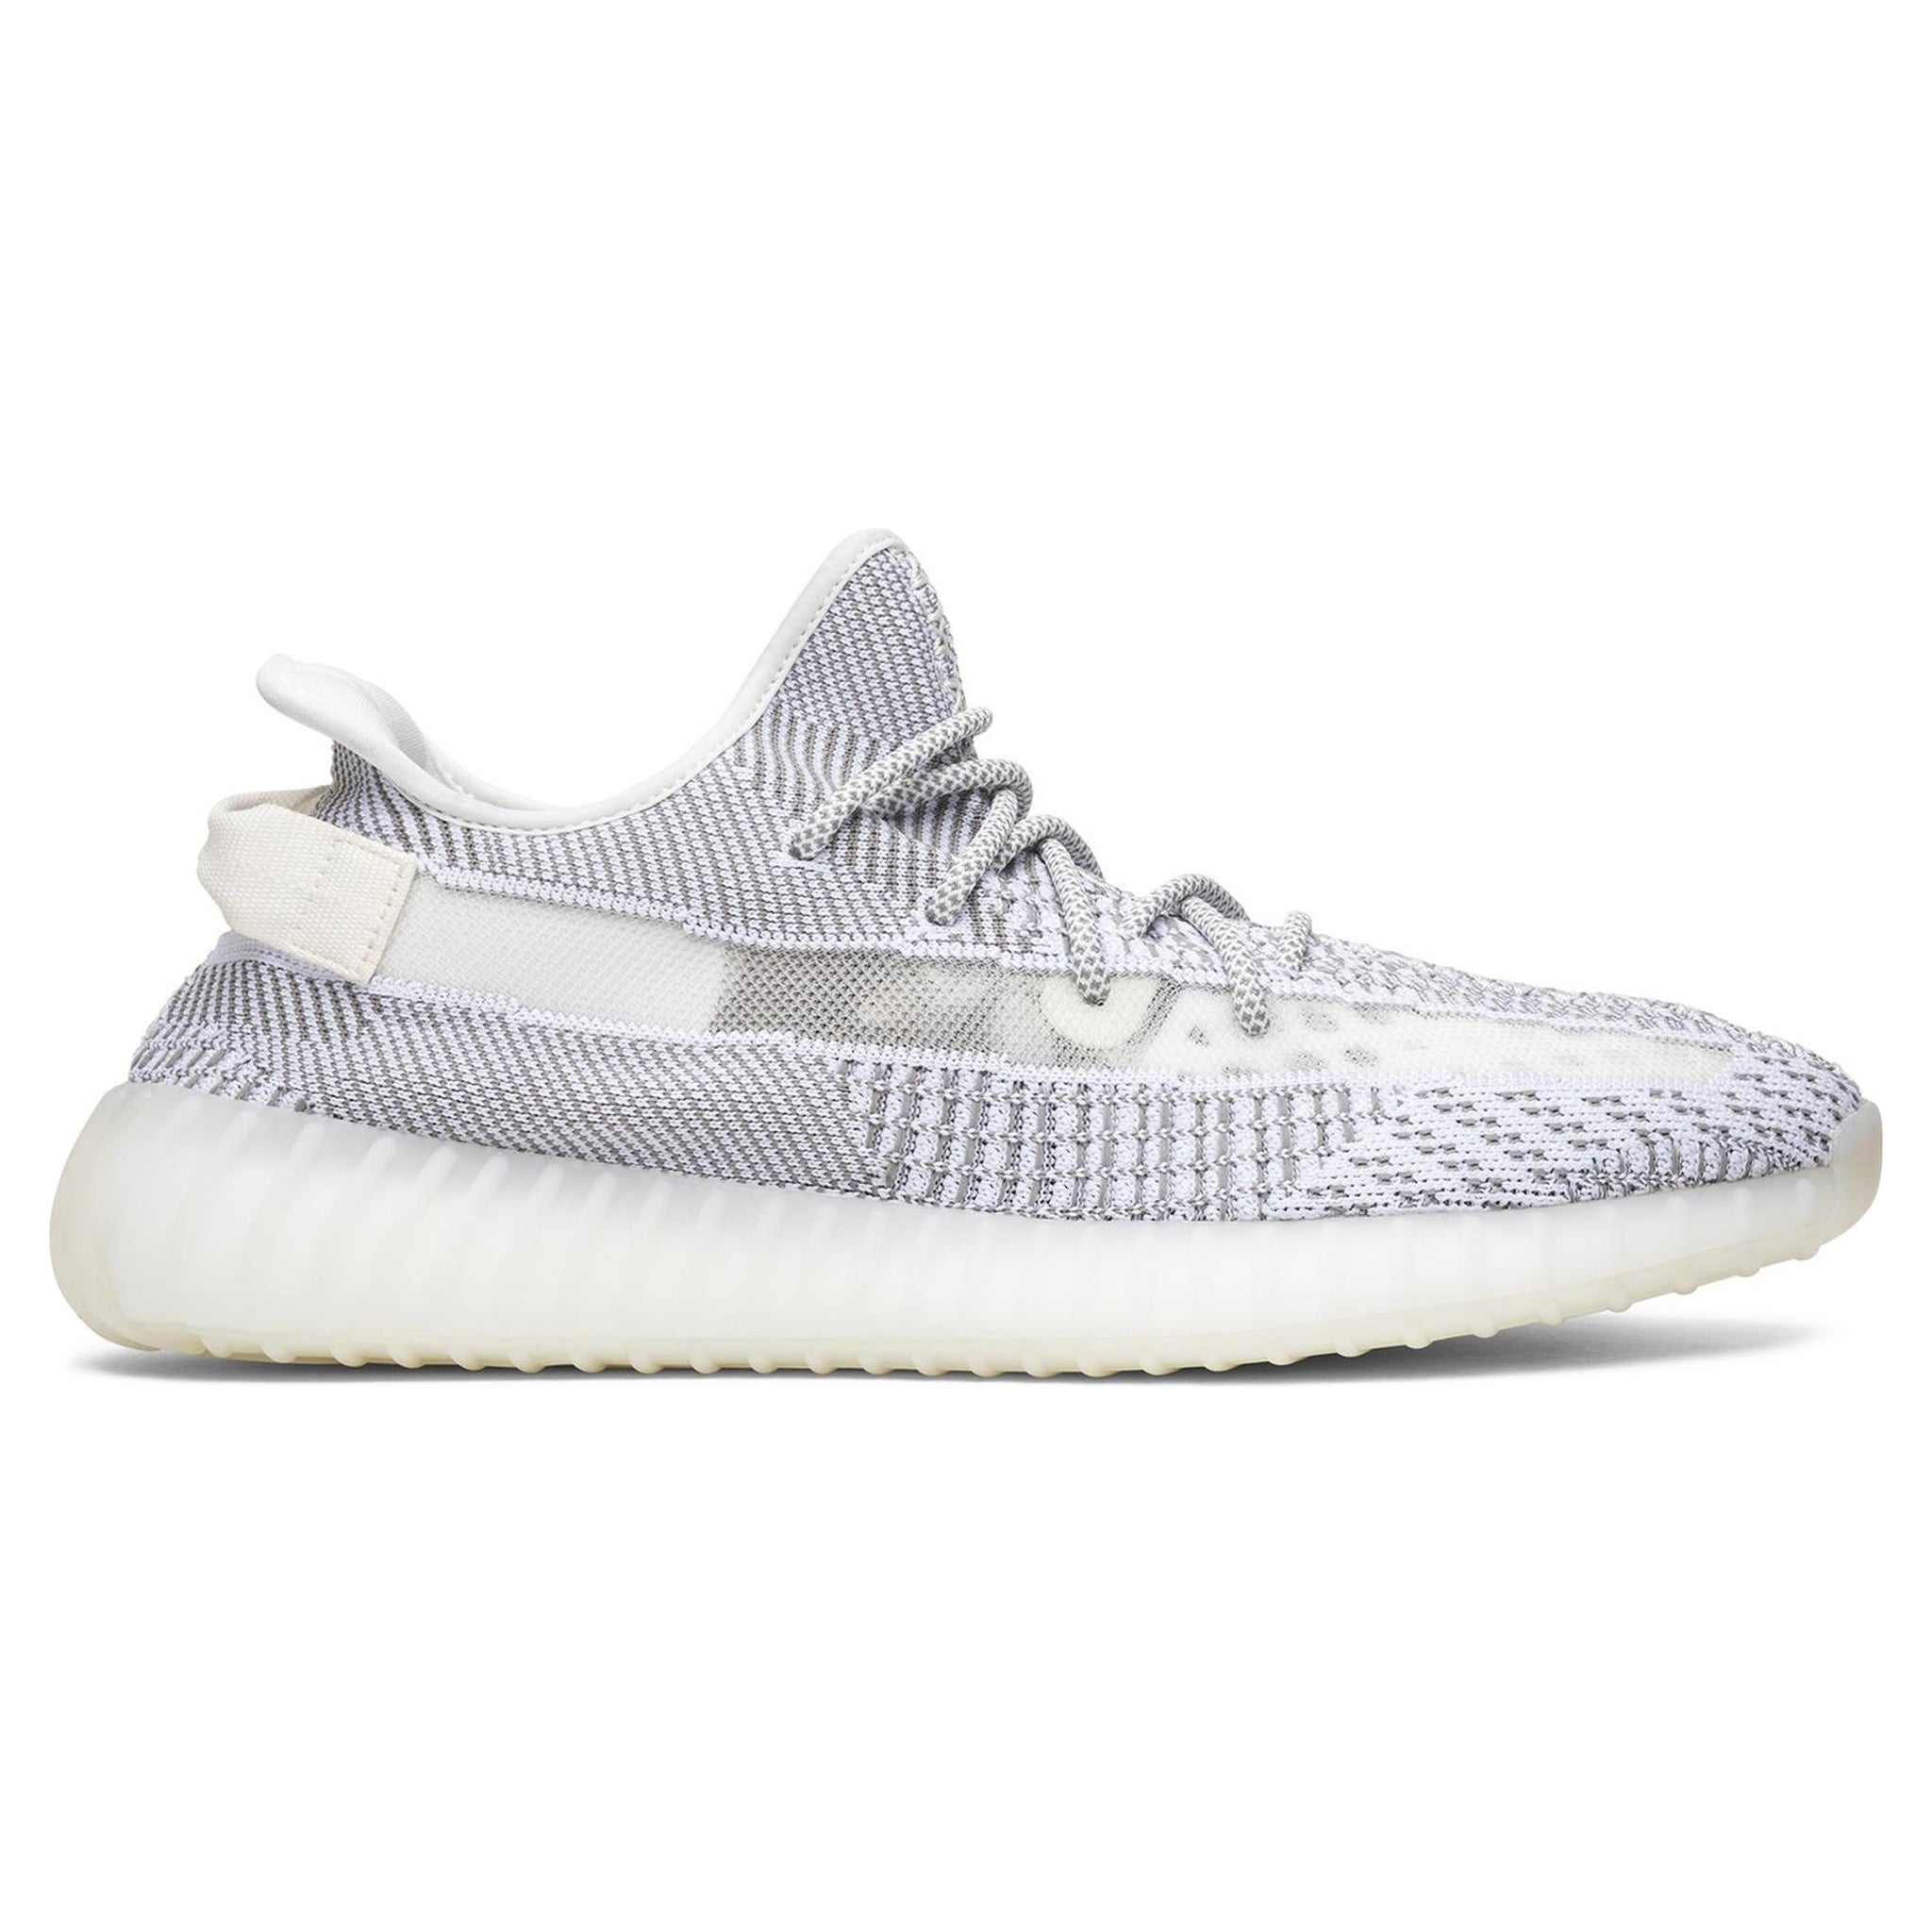 Yeezy Boost 350 V2 'Static Non-Reflective' 2018